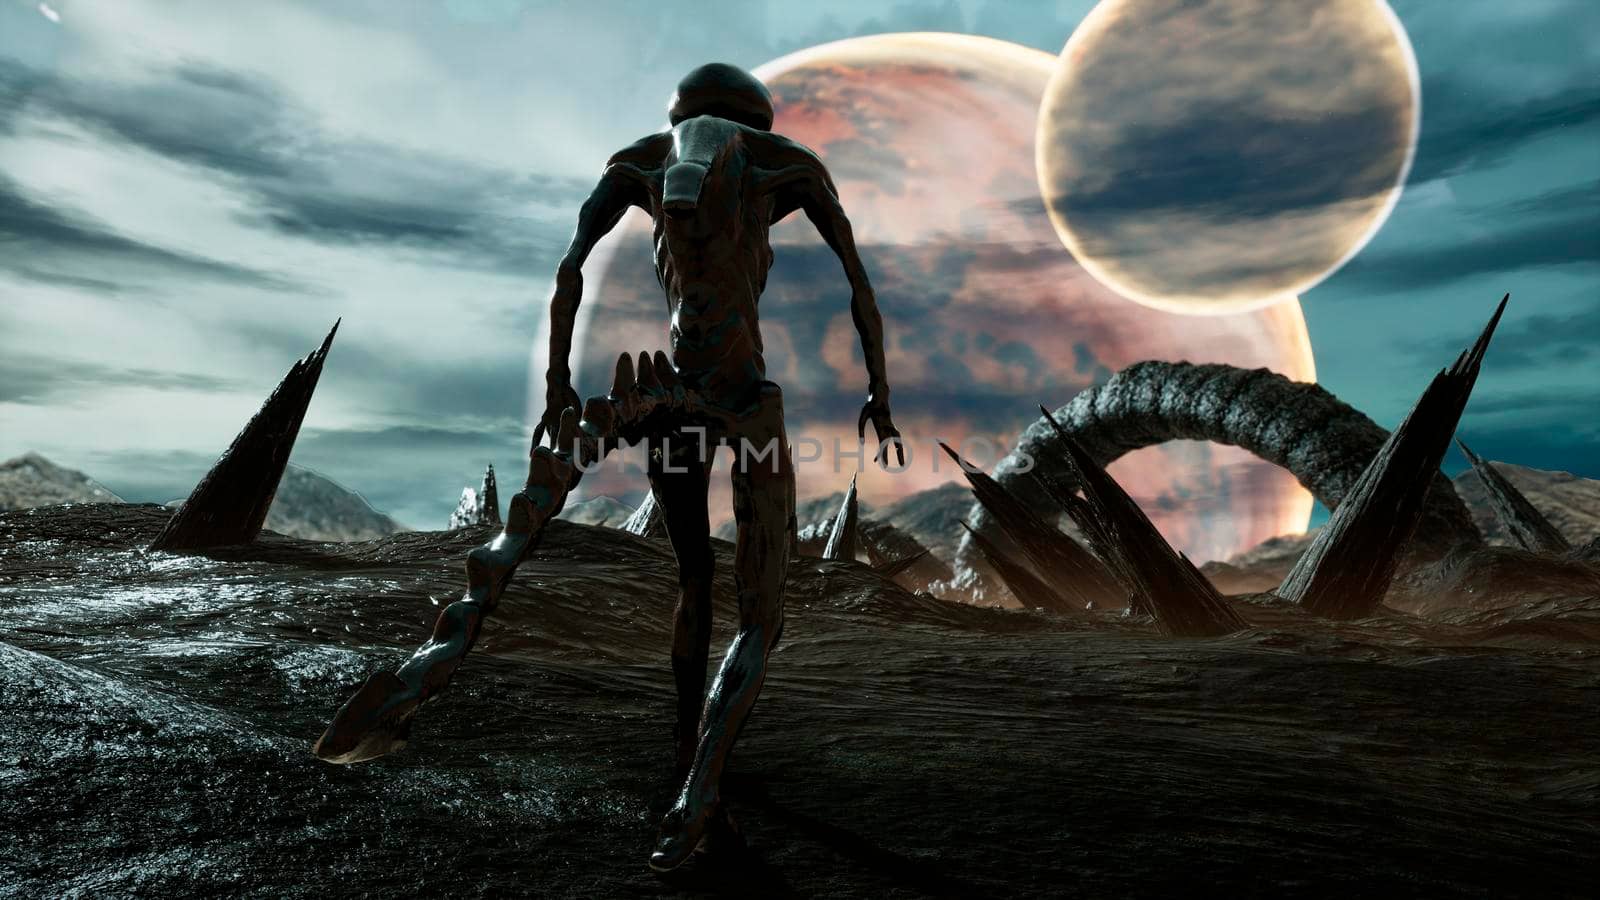 An alien walks on his amazing planet. Landscape of an creepy alien planet in the lost space.